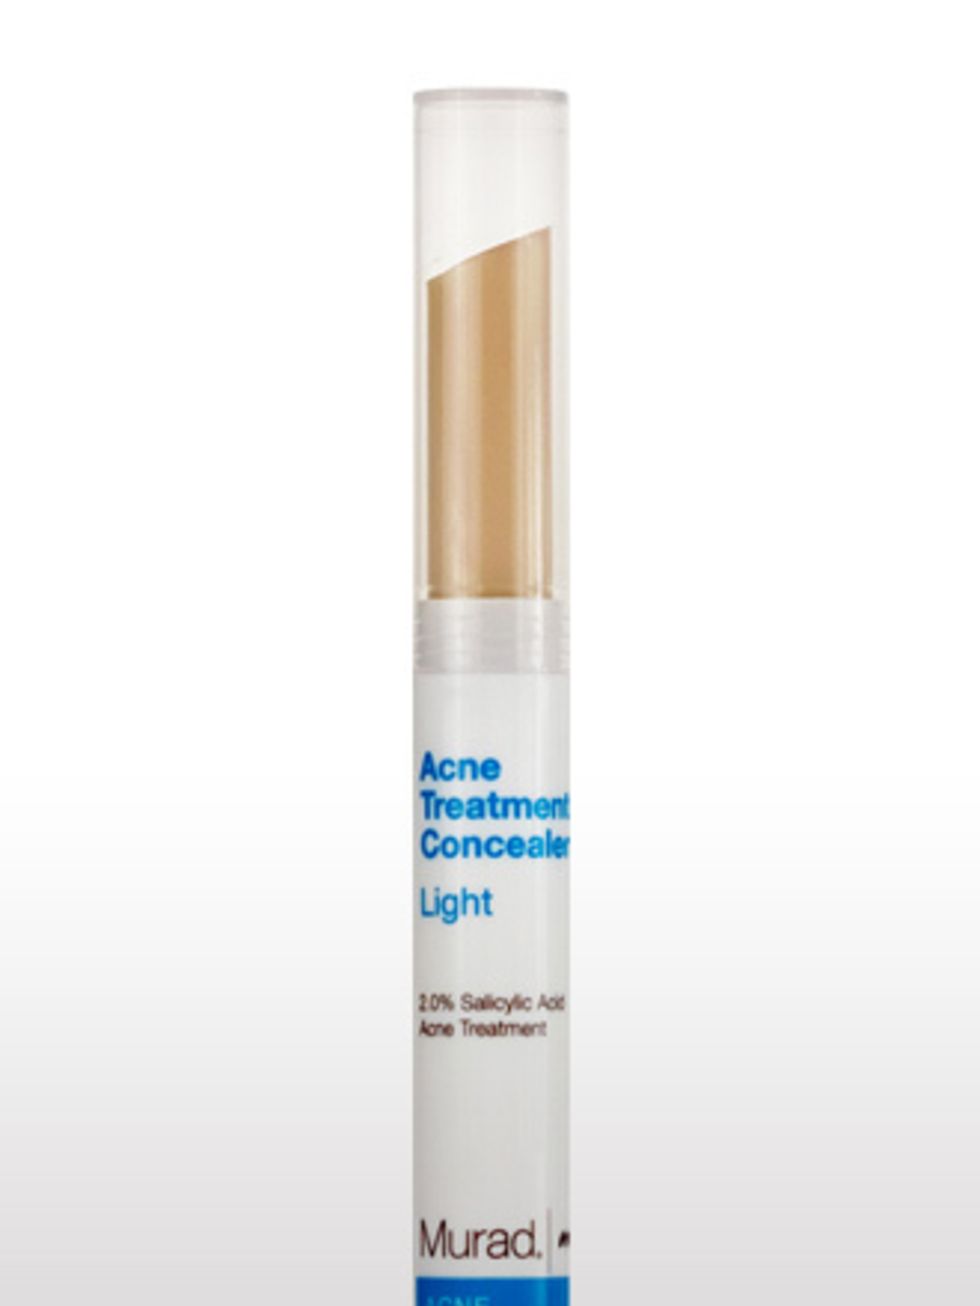 <p>Acne Treatment Concealer, £12 by <a href="http://www.muraduk.com/index.php?page=contact">Murad</a></p><p>Murads concealer is the perfect spot covering consistency and colour. Smelling reassuringly medicinal, without ever being overpowering, this conce